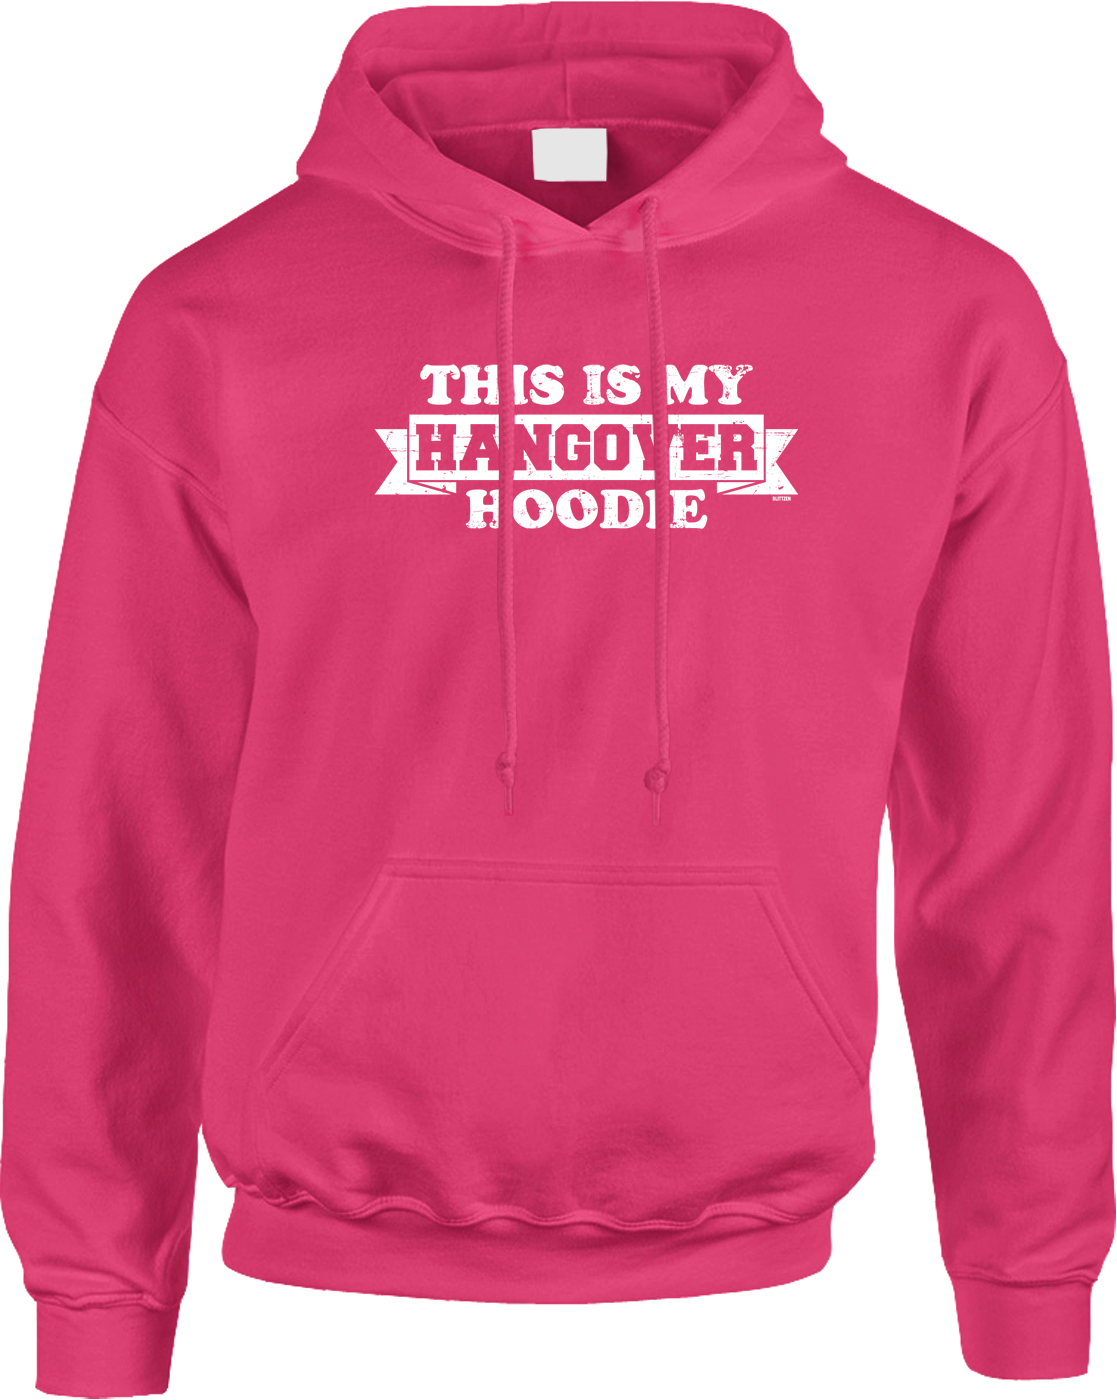 Friday Drinking Hangover Party Gift Hoody Funny Is It Beer O'Clock Yet 